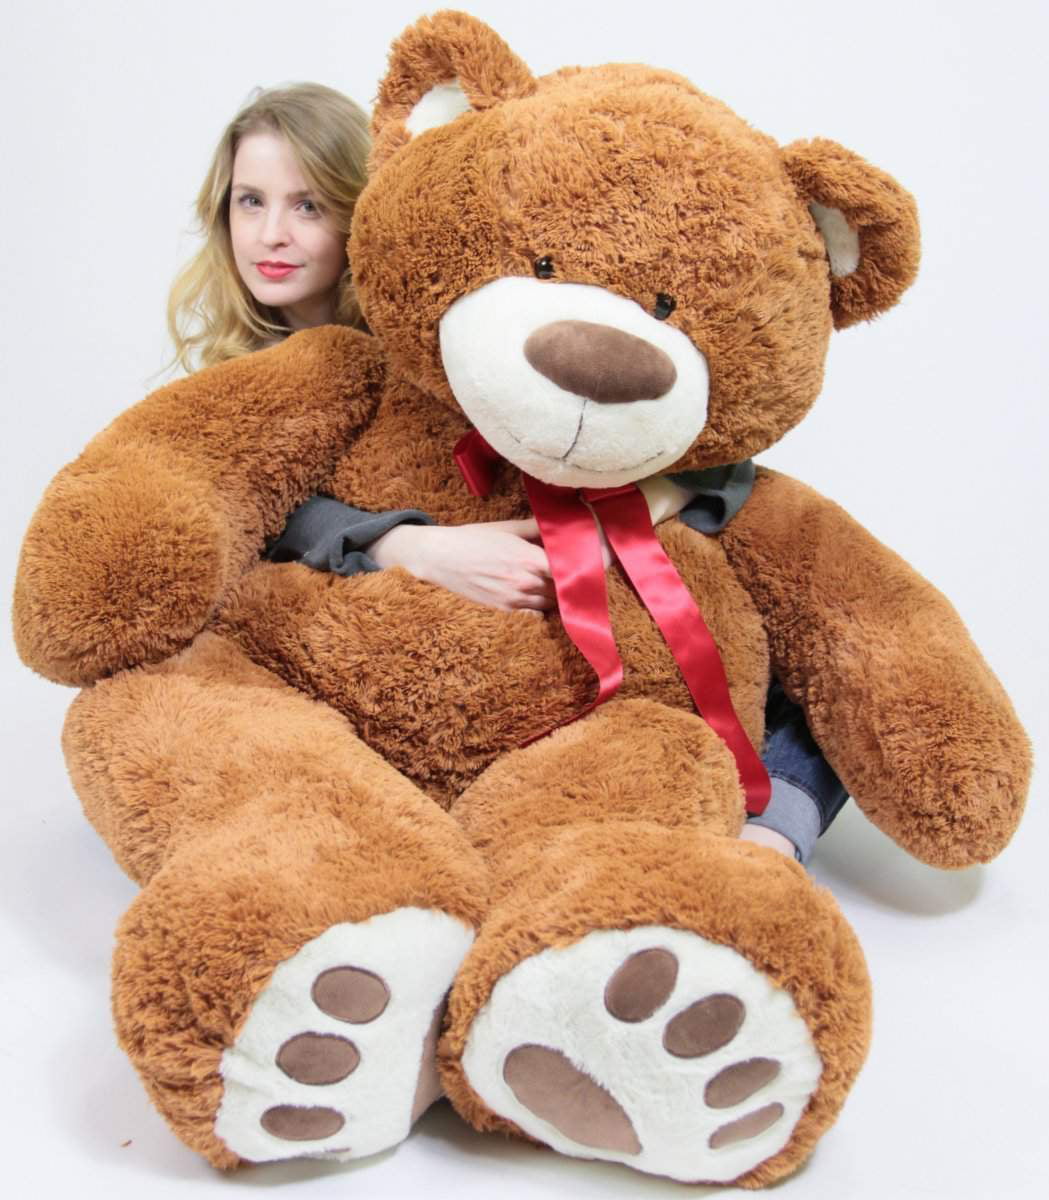 5 foot very big smiling teddy bear 60 inch soft brown giant stuffed animal  with bigfoot paws